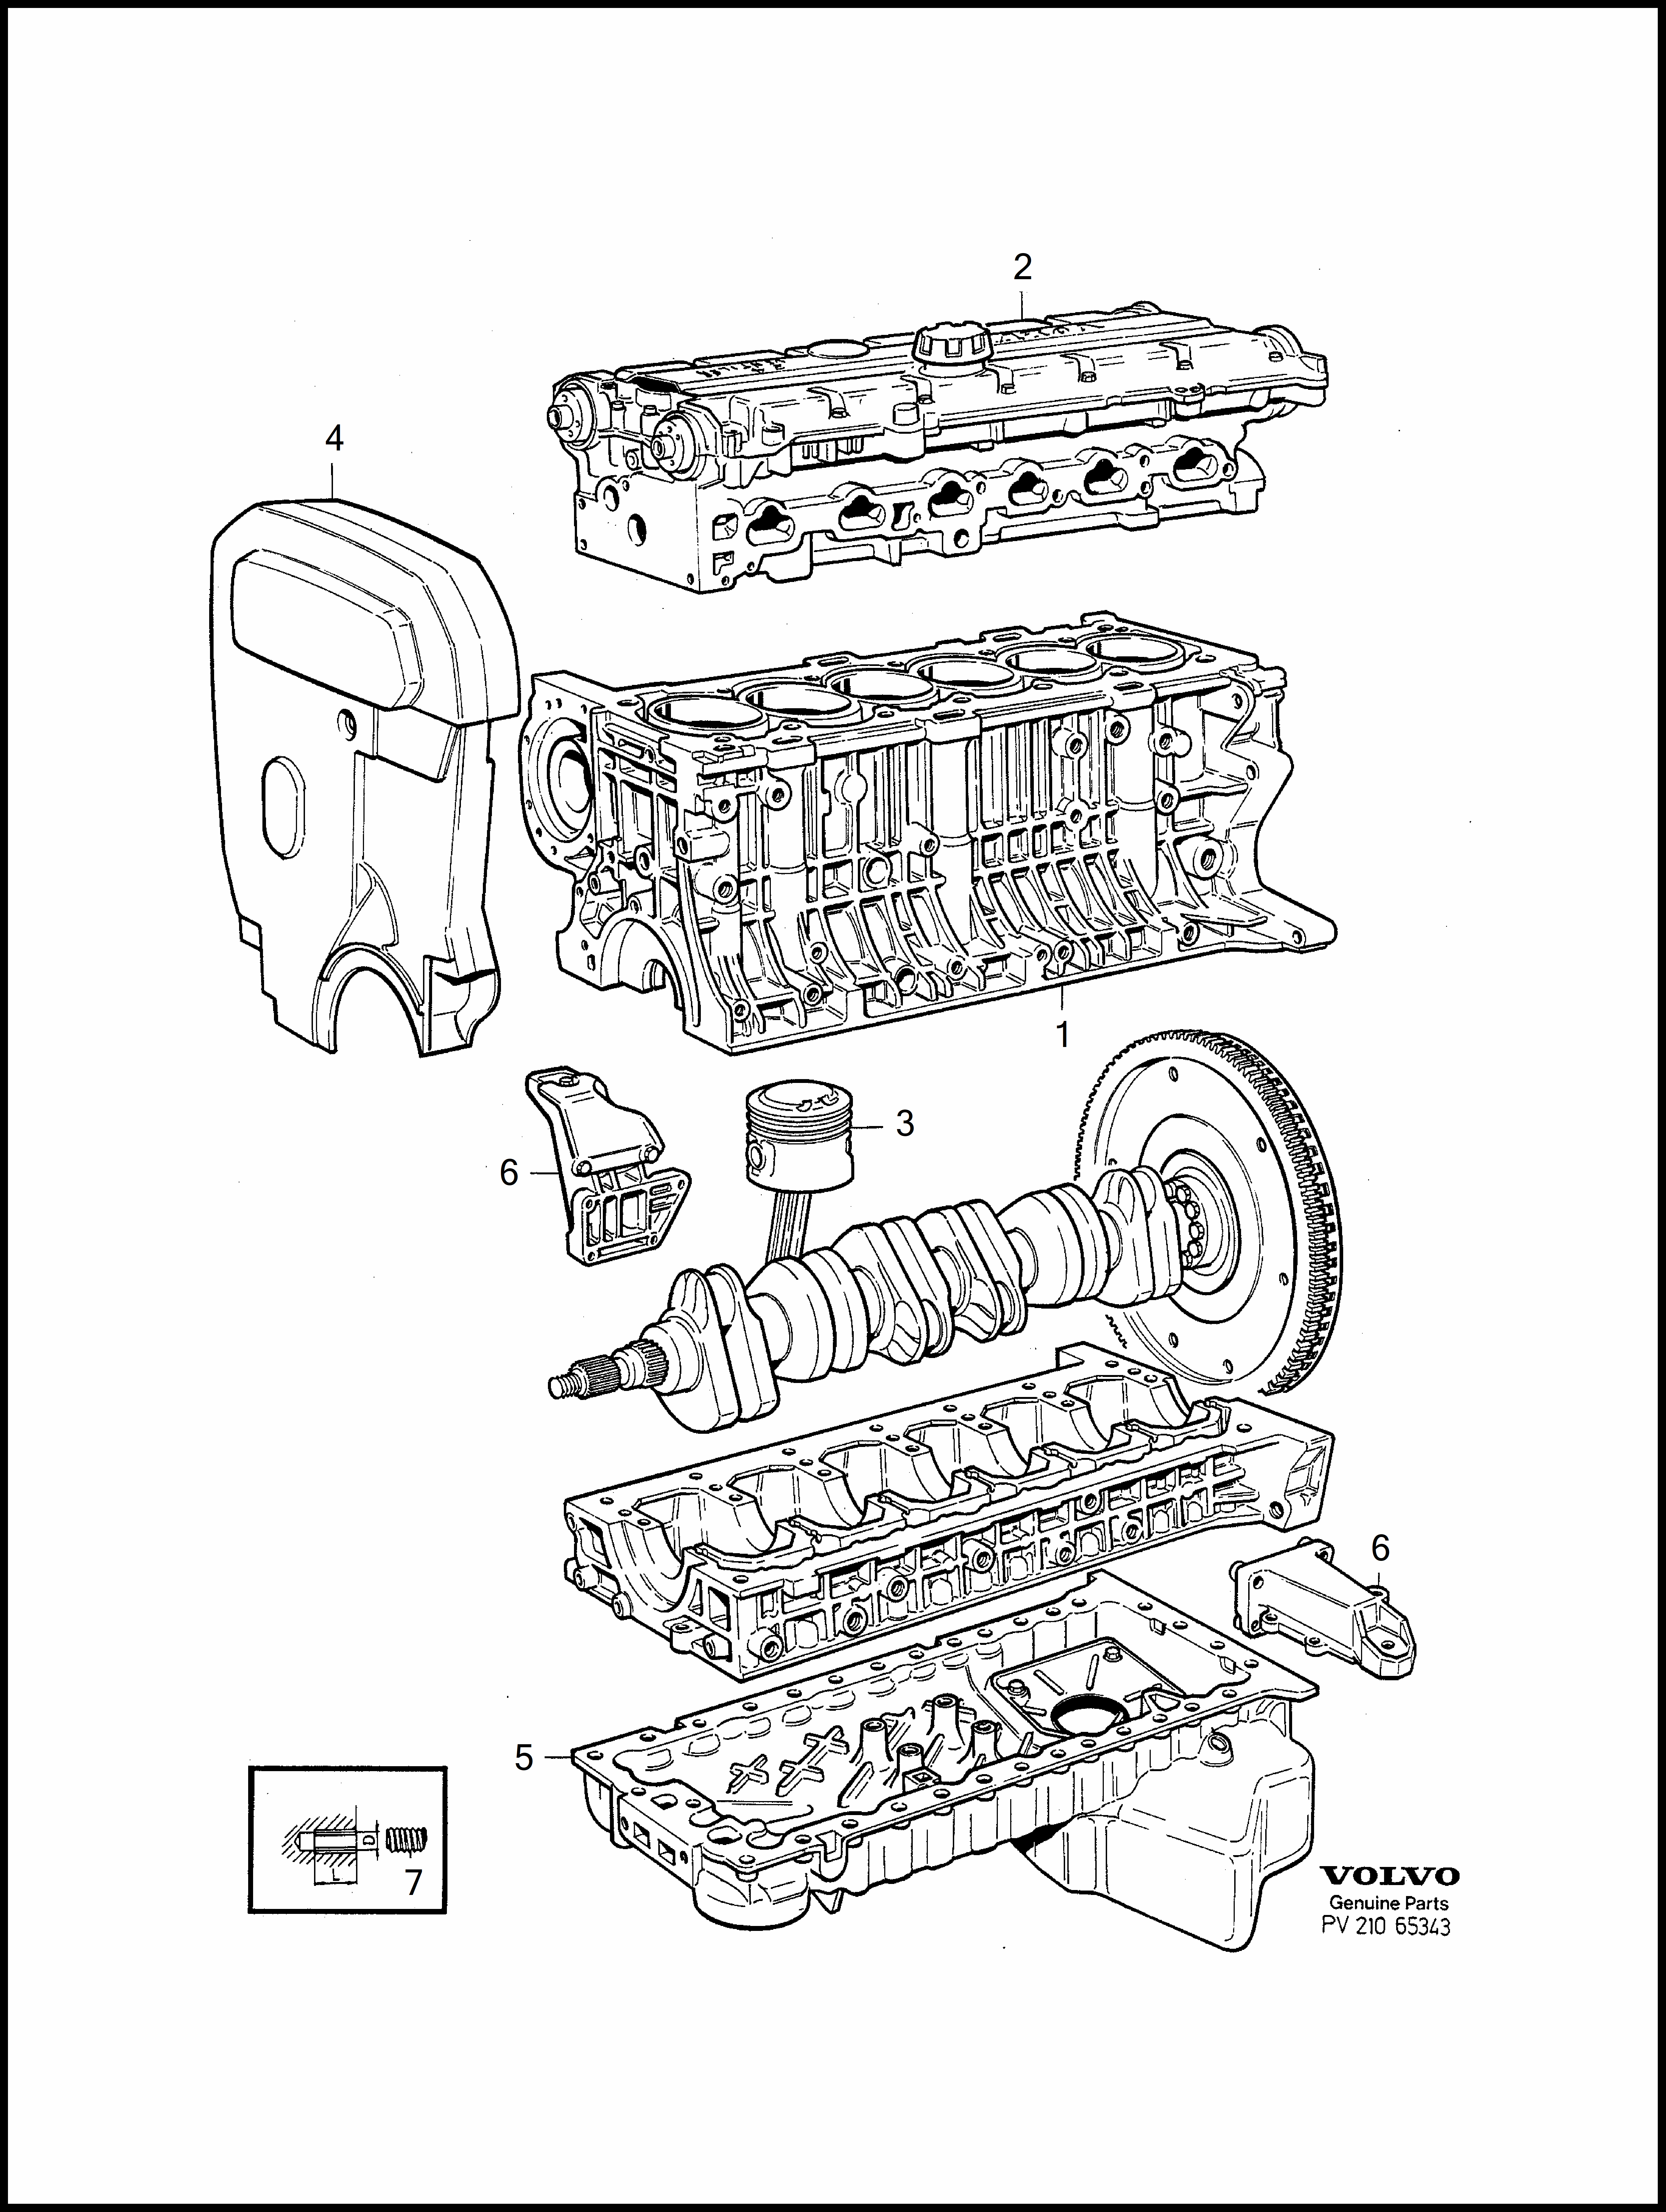 engine with fittings pre Volvo 960 960